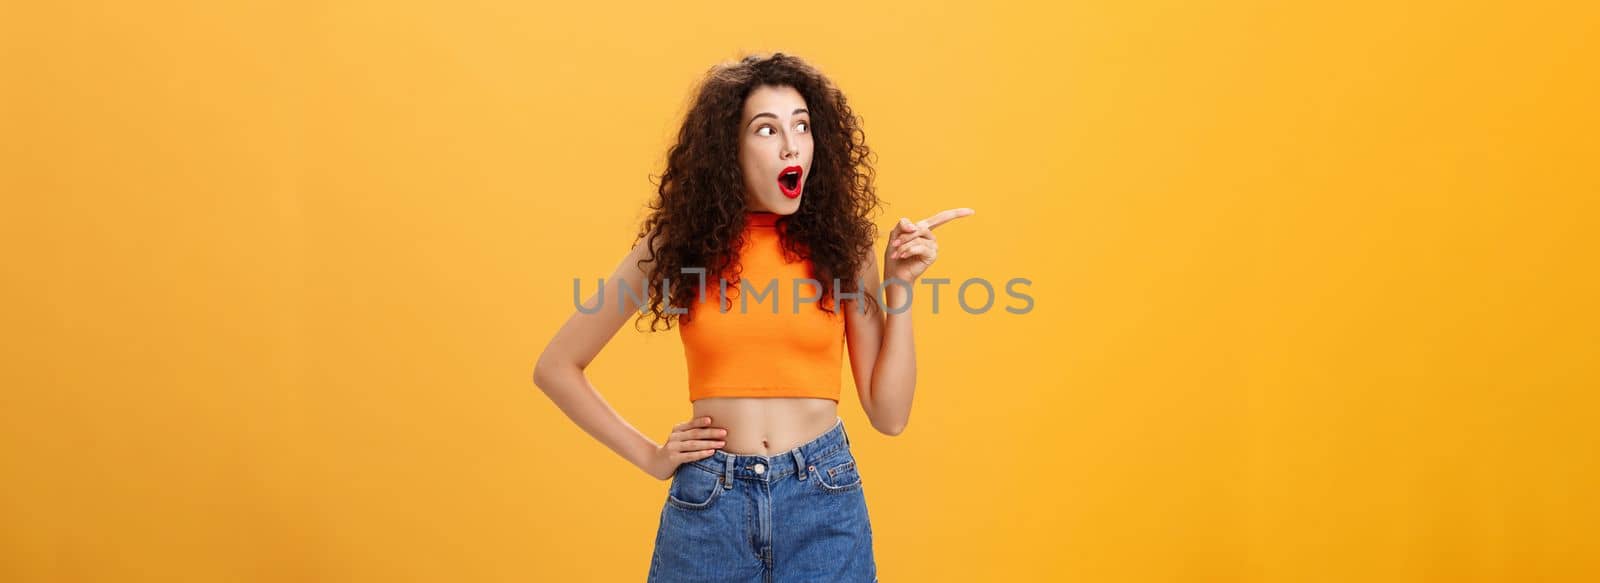 Woman peeking at neighbours window. being surprised and amazed pointing and staring speechless left standing over orange background with dropped jaw intrigued and thrilled look in cropped top.